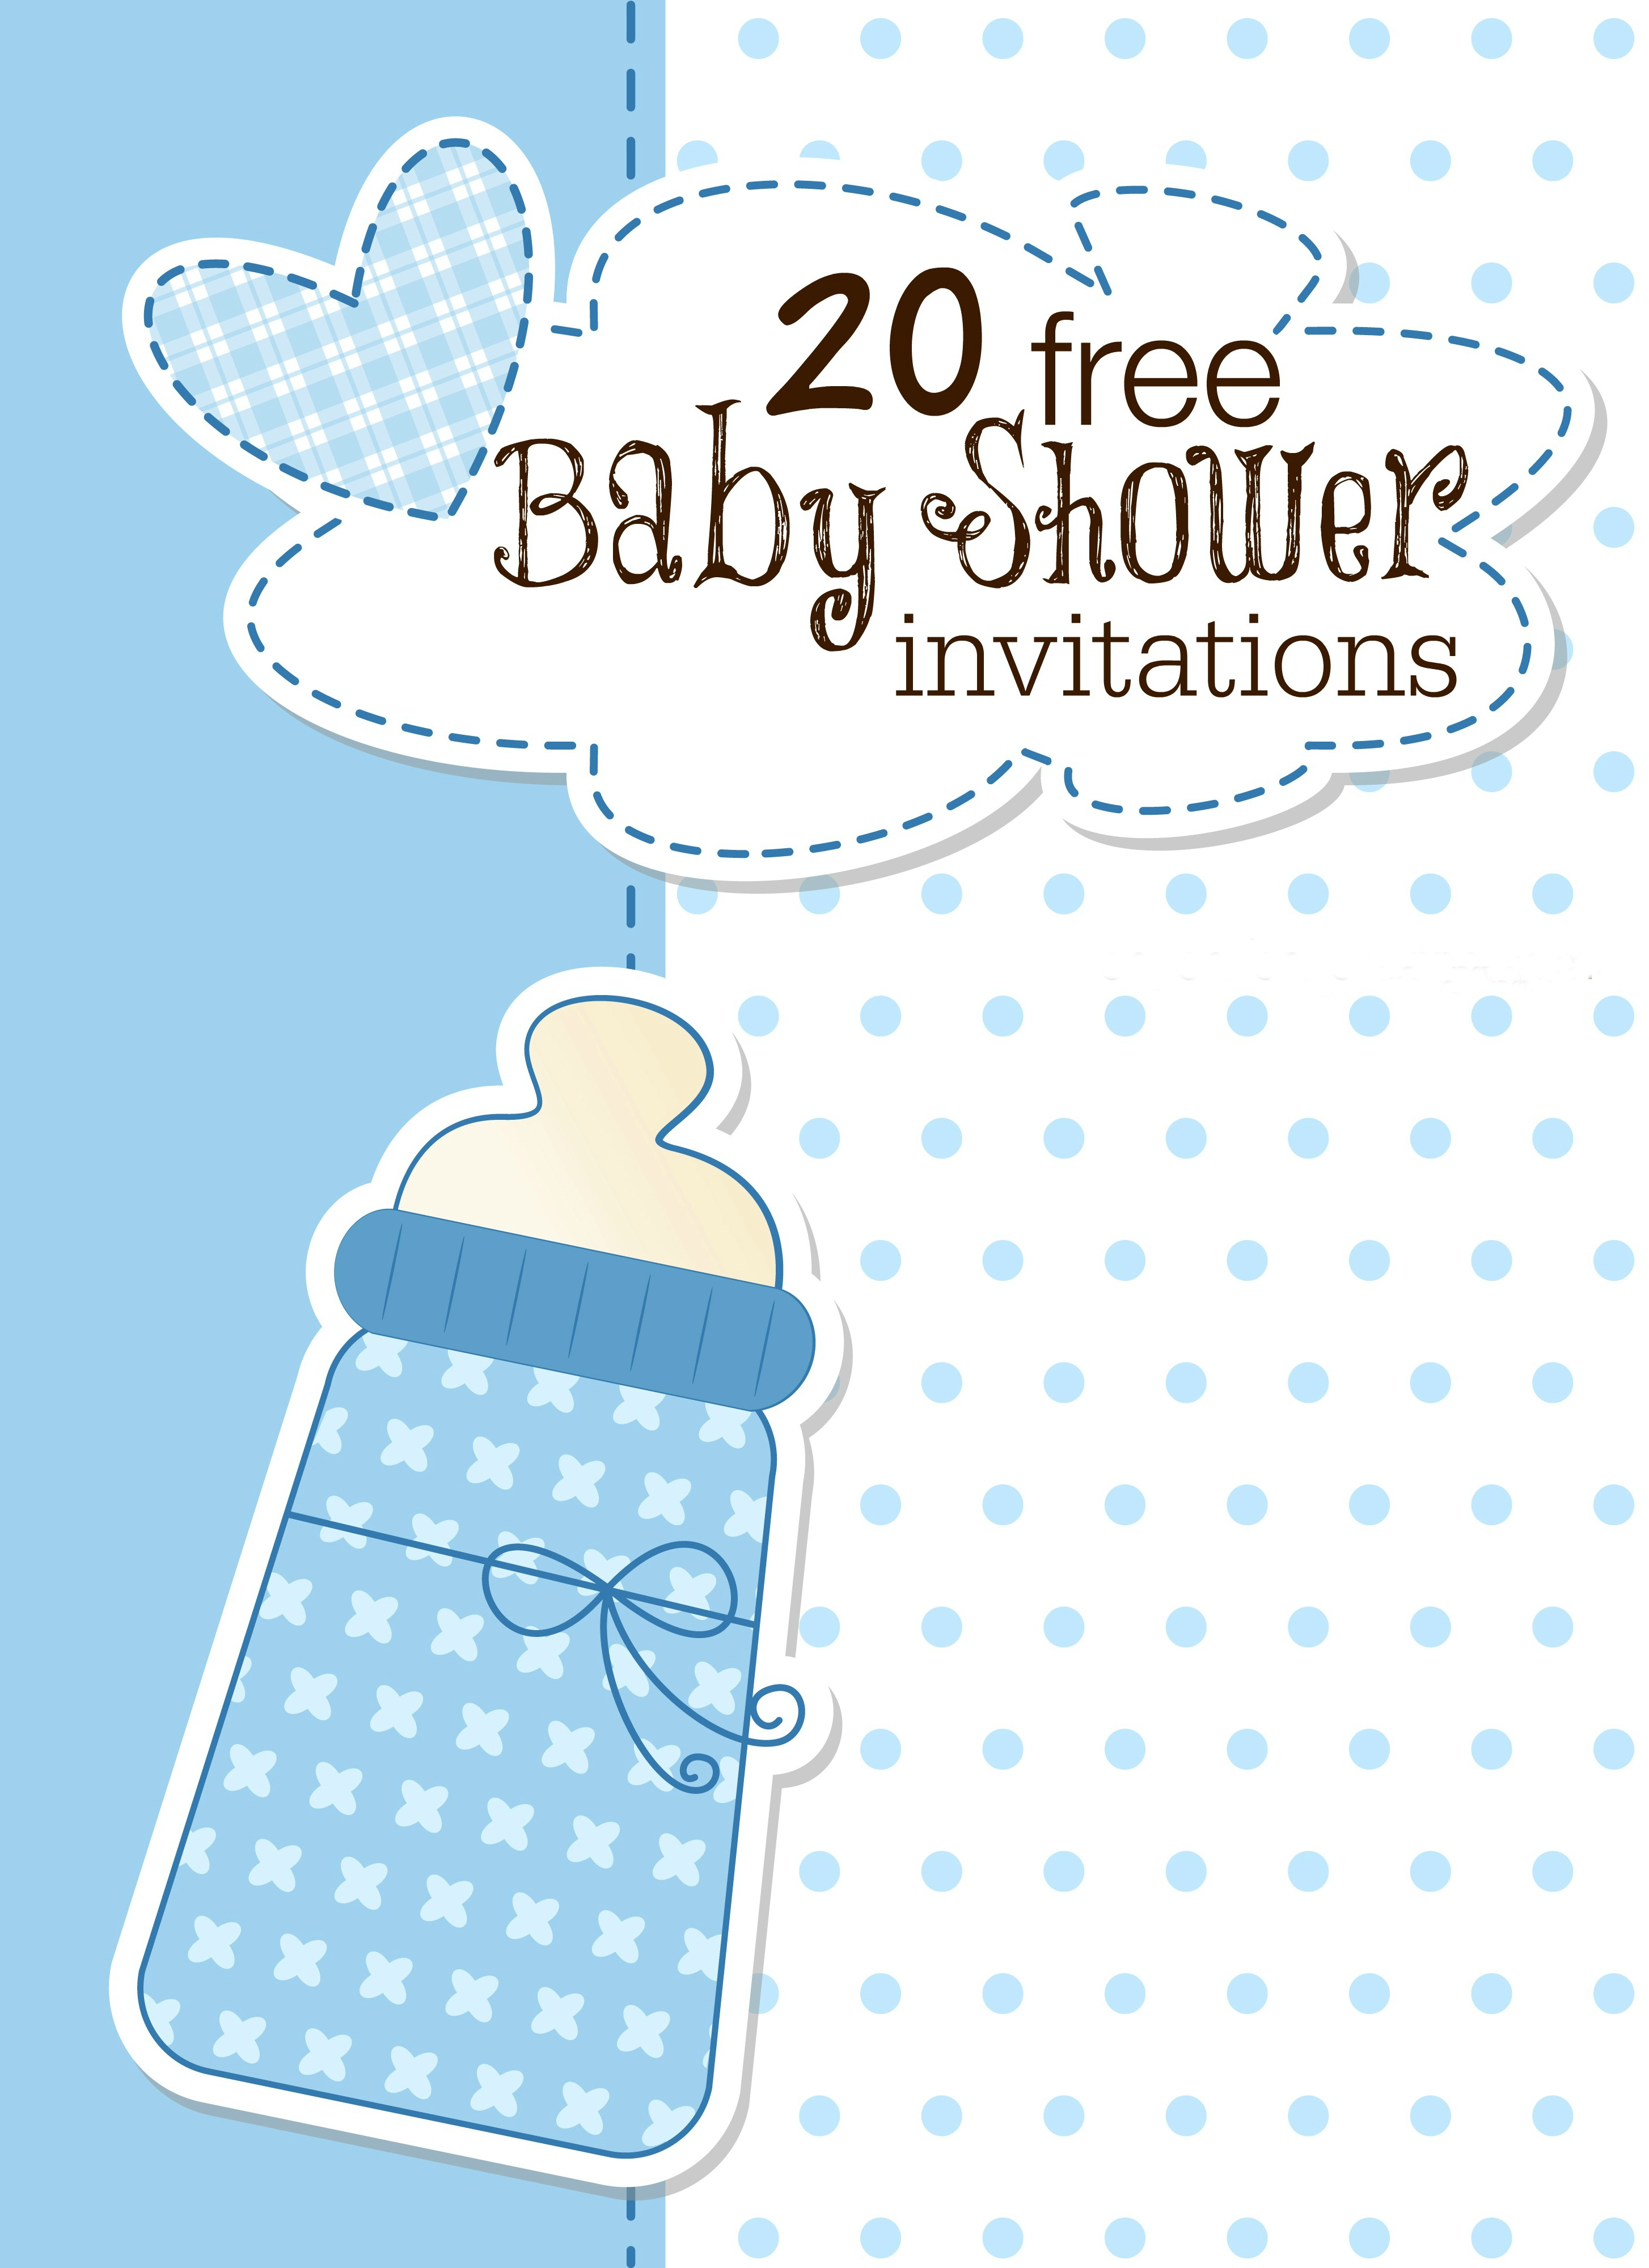 Printable Ba Shower Invitations within dimensions 2908 X 4000